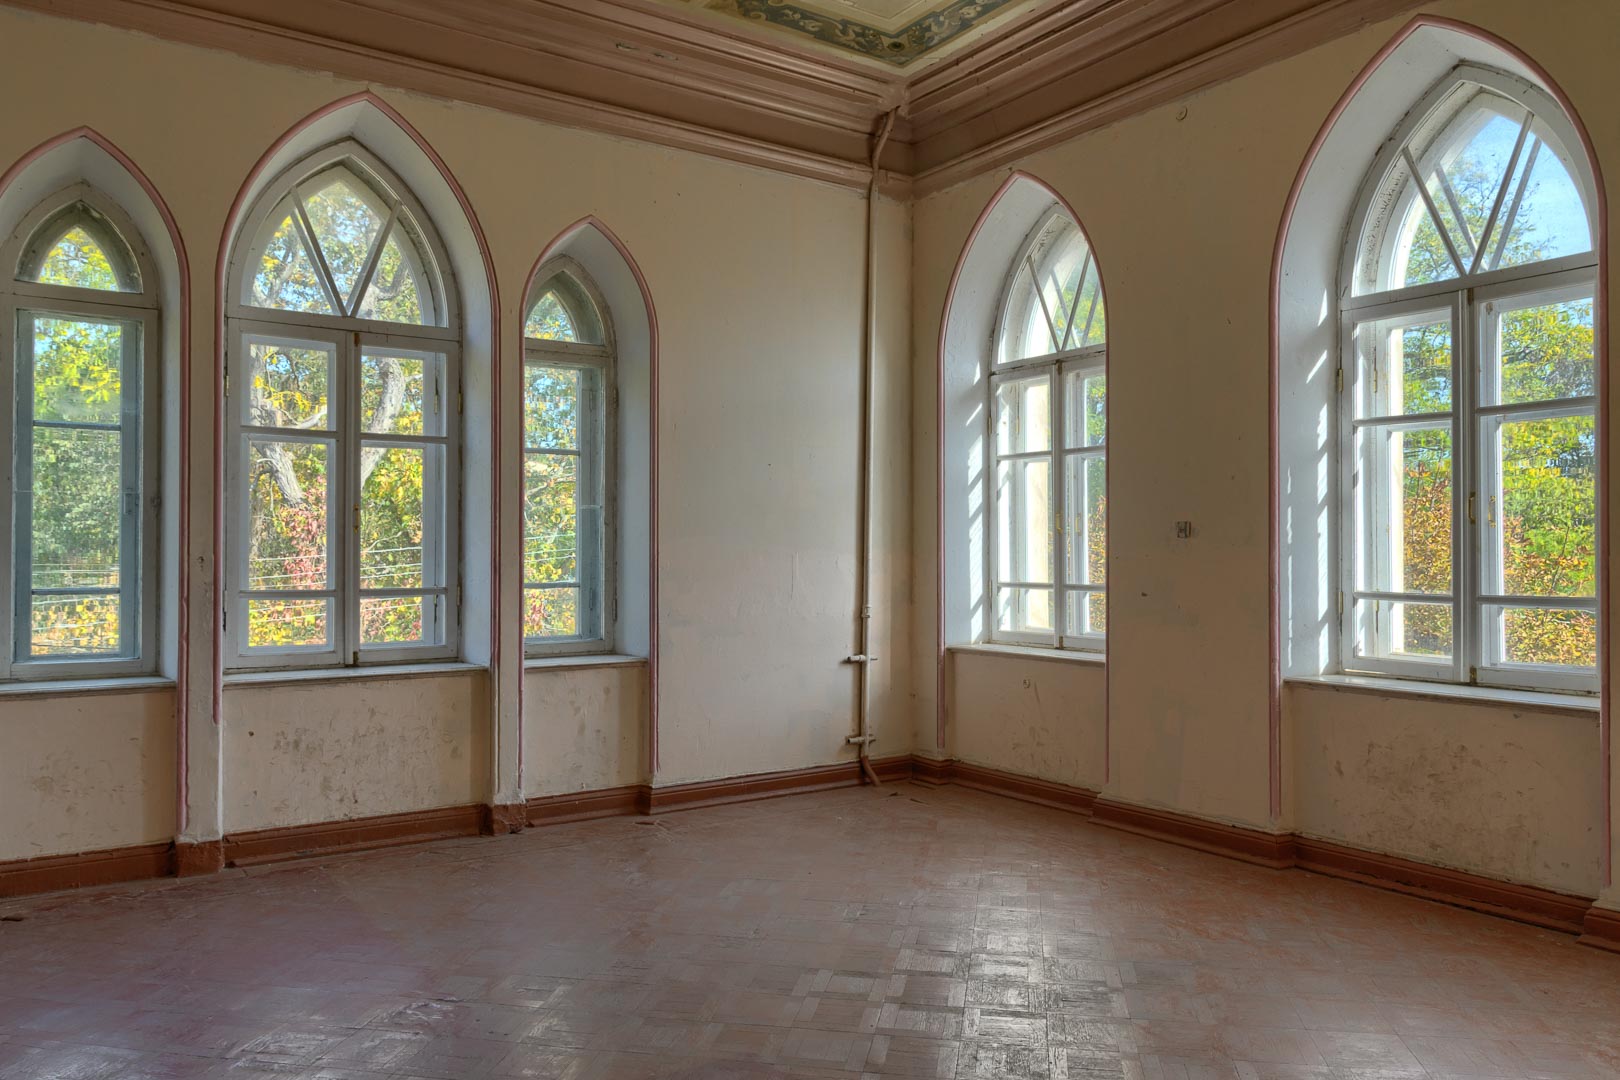 Backplate • ID: 5701 • HDRI Haven - Palace Room With Worn Floor